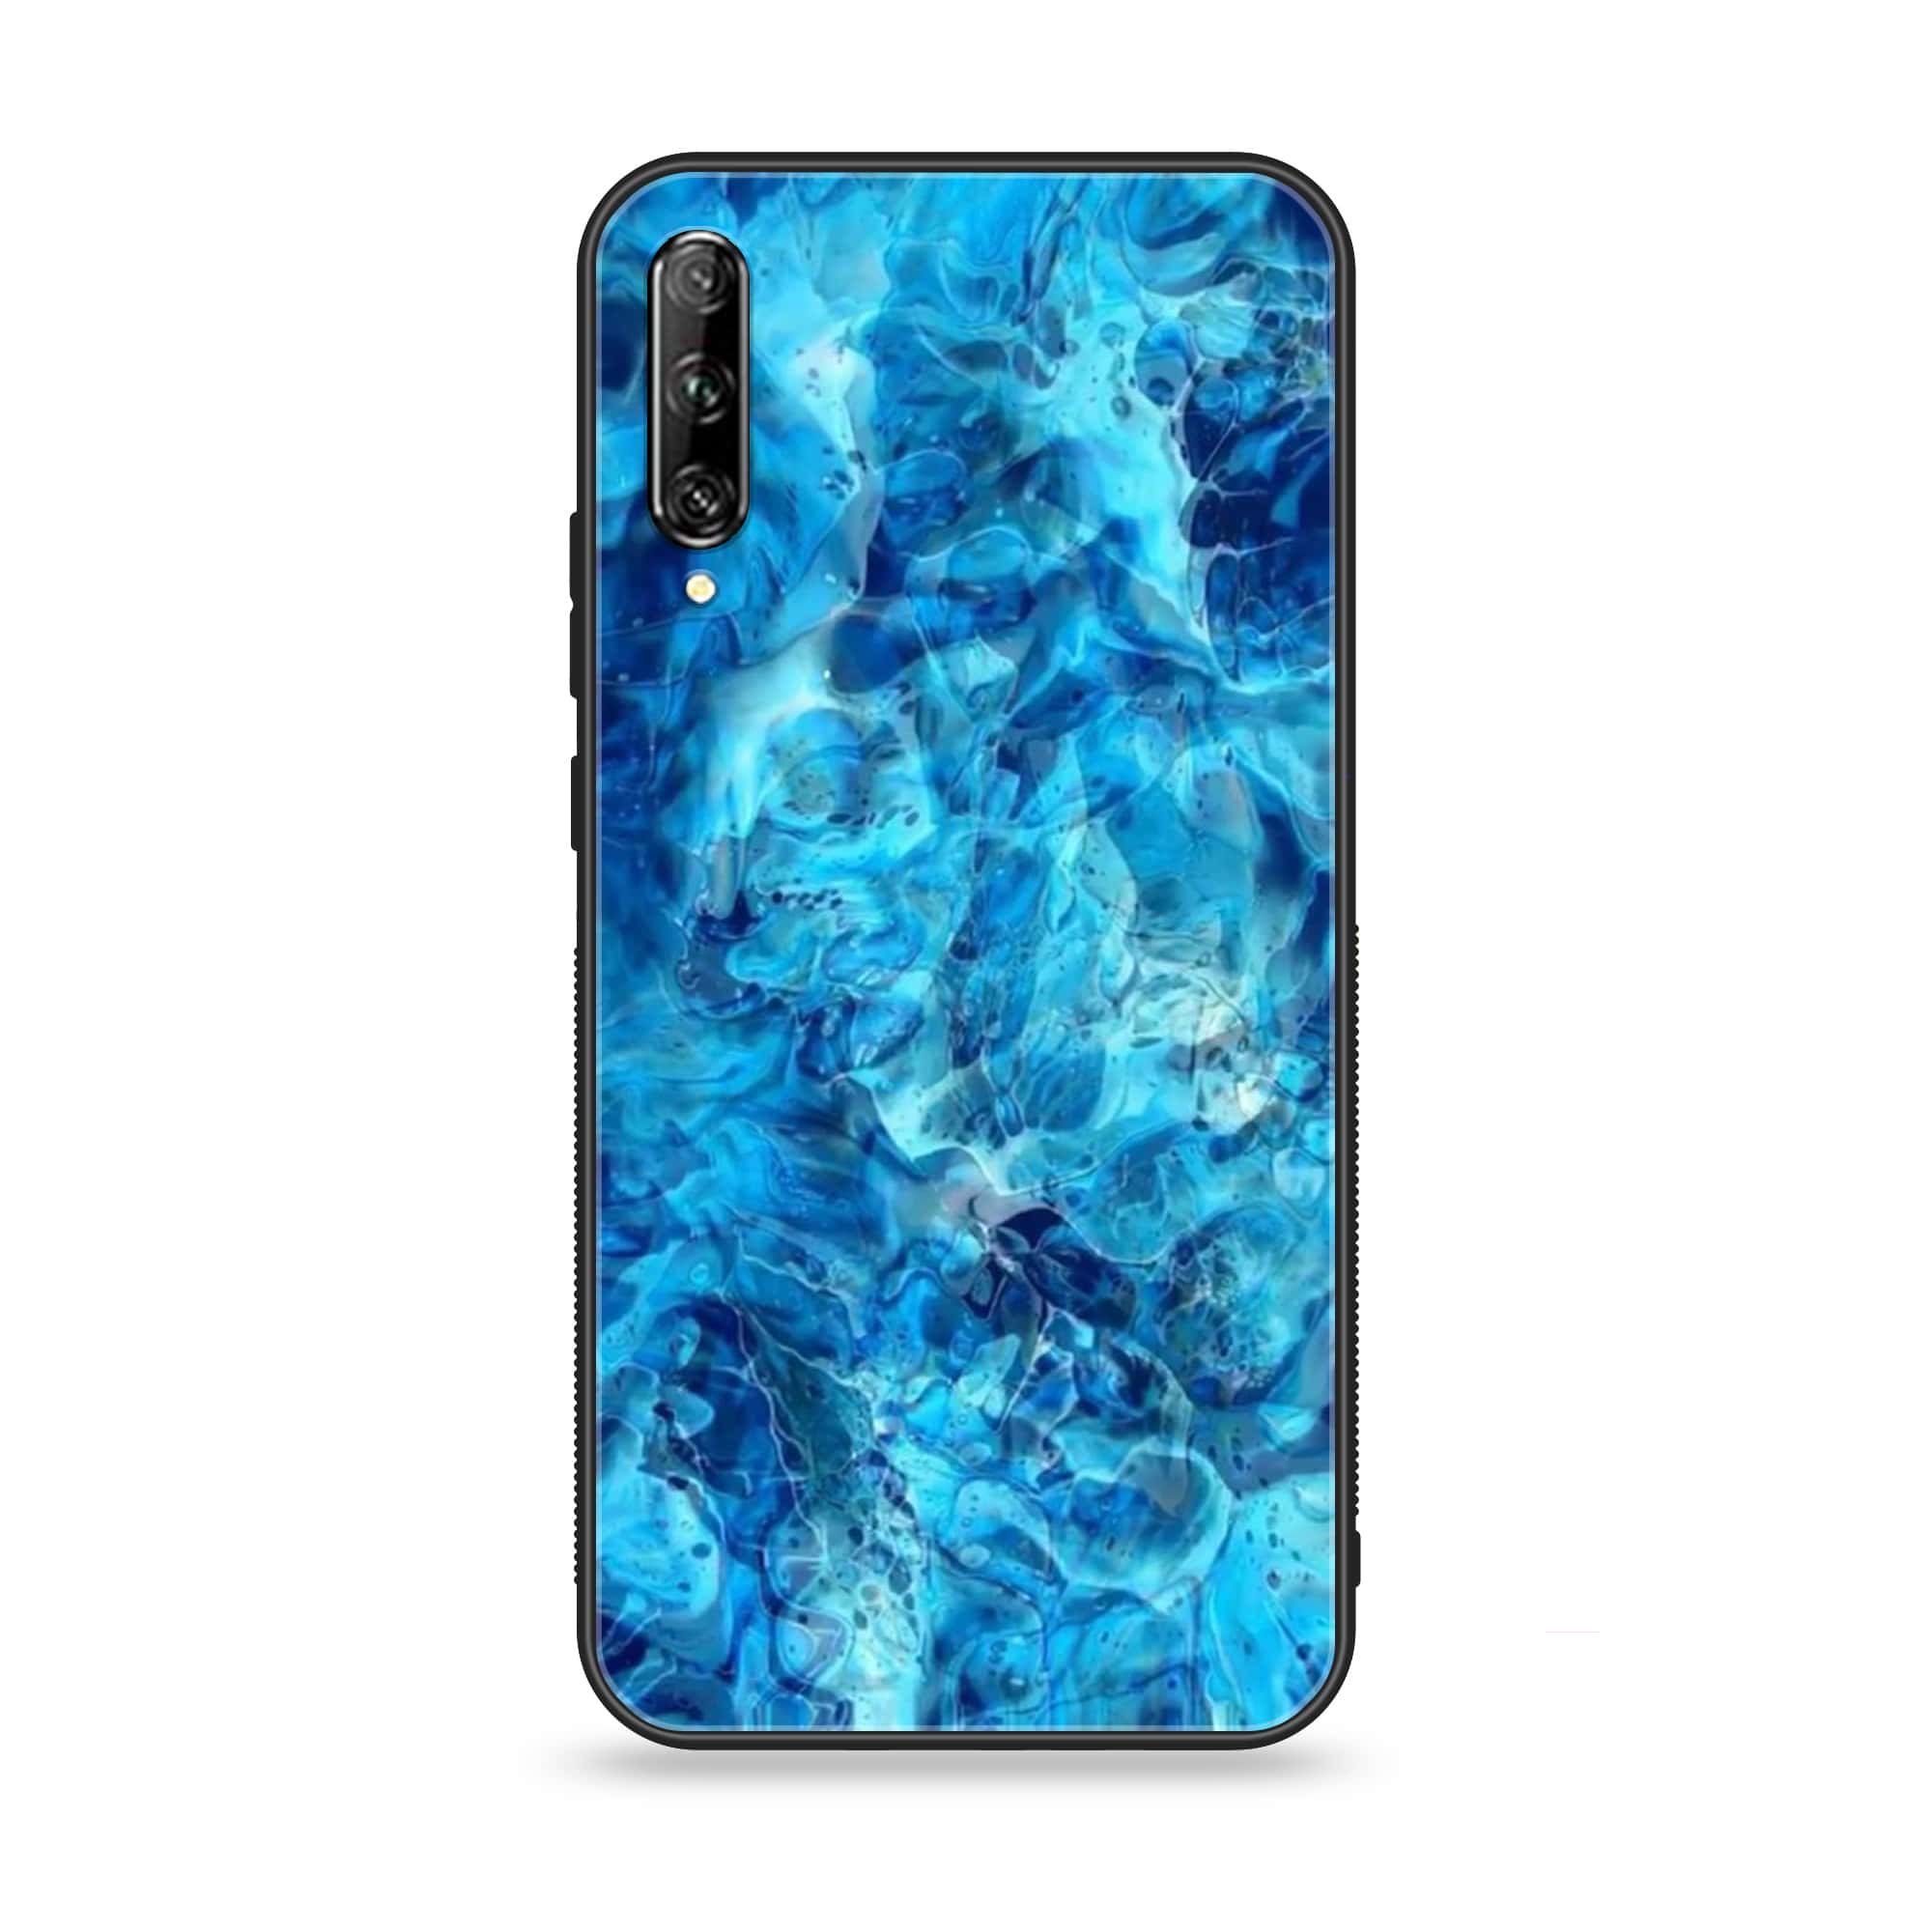 Huawei Y9s - Blue Marble Series - Premium Printed Glass soft Bumper shock Proof Case